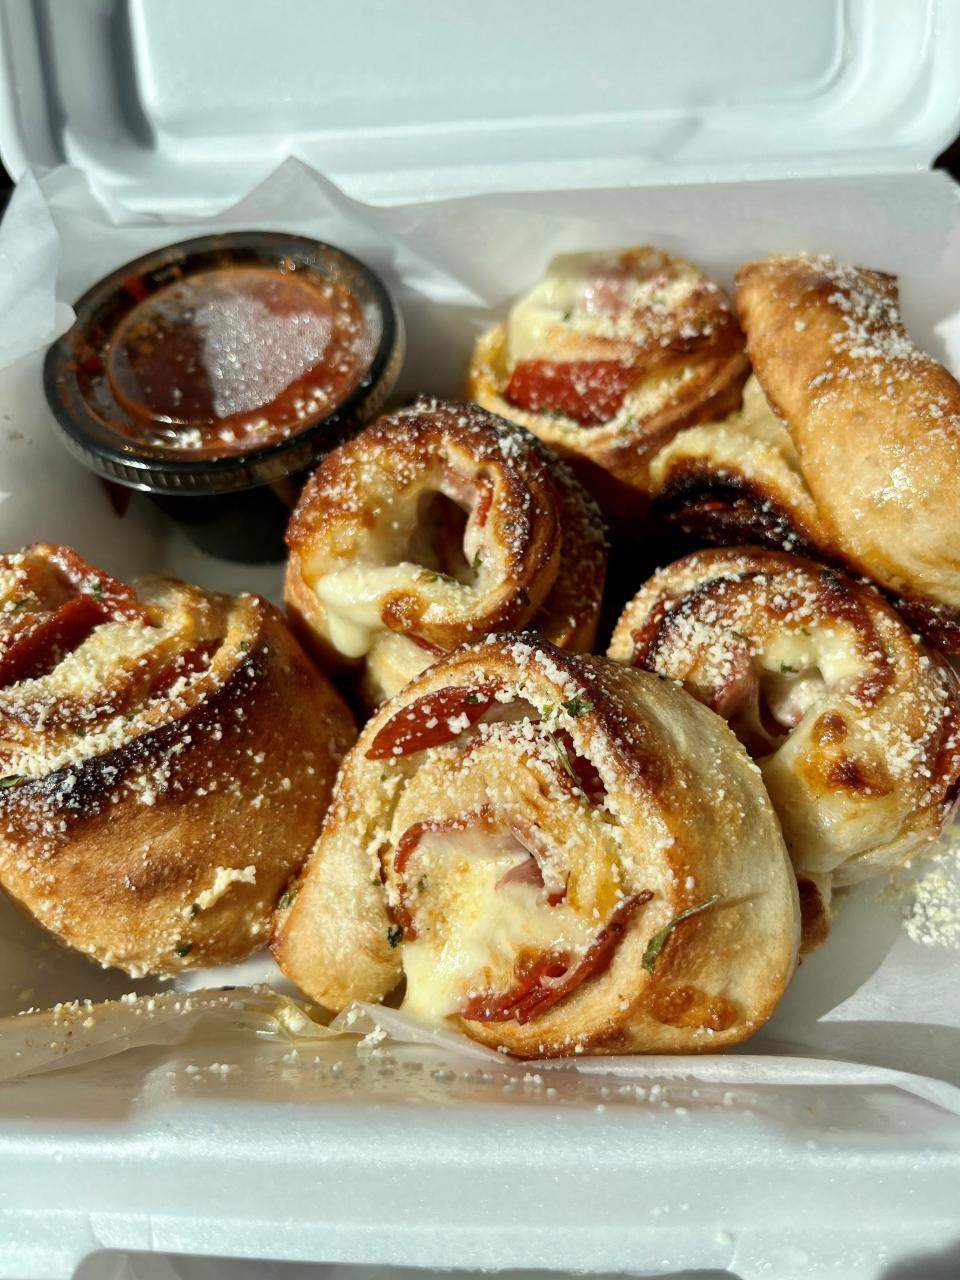 Pepperoni rolls from Uncle Rico's in Fort Myers